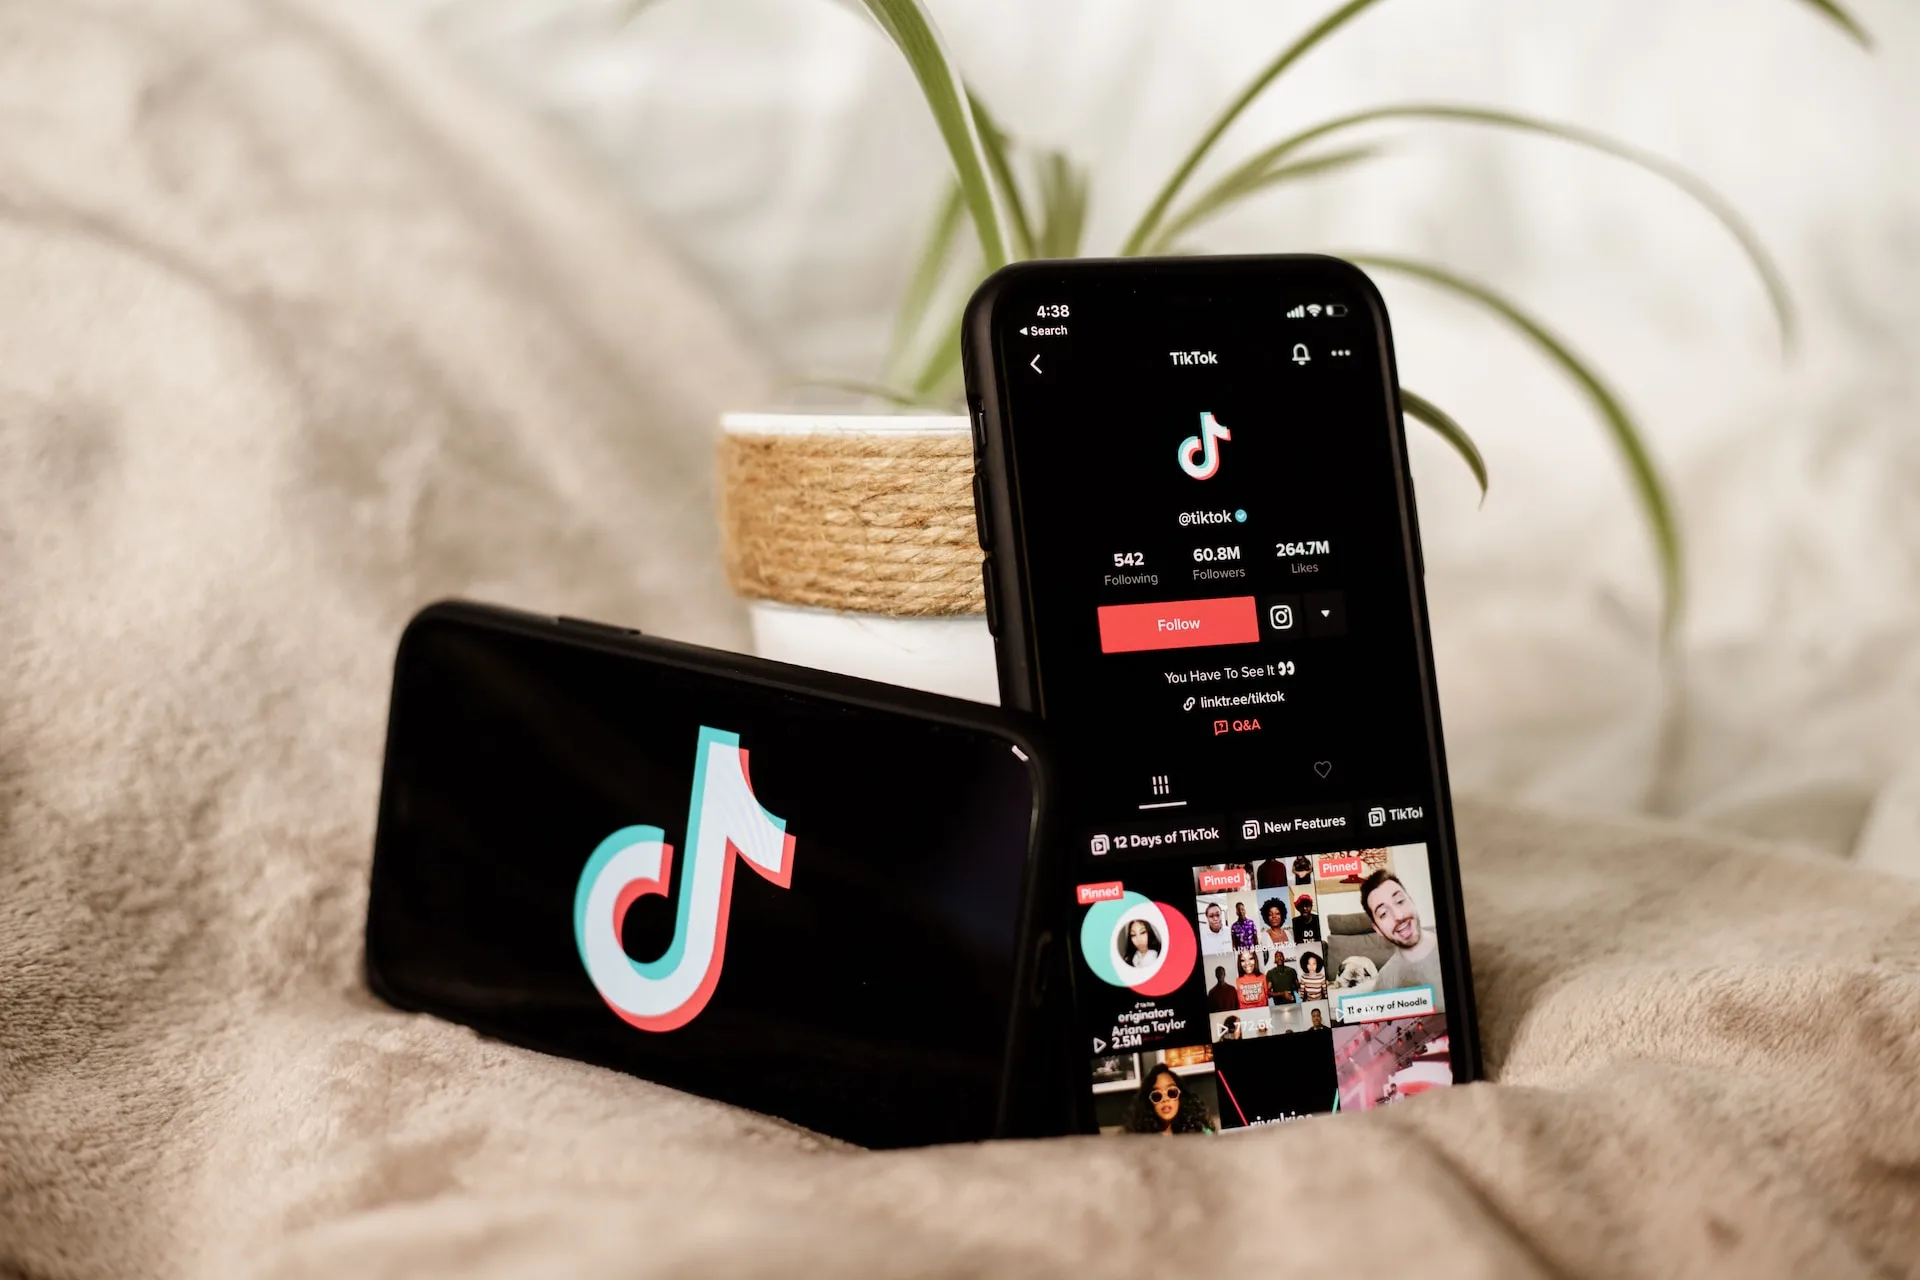 The French government bans recreational apps on government devices, such as TikTok